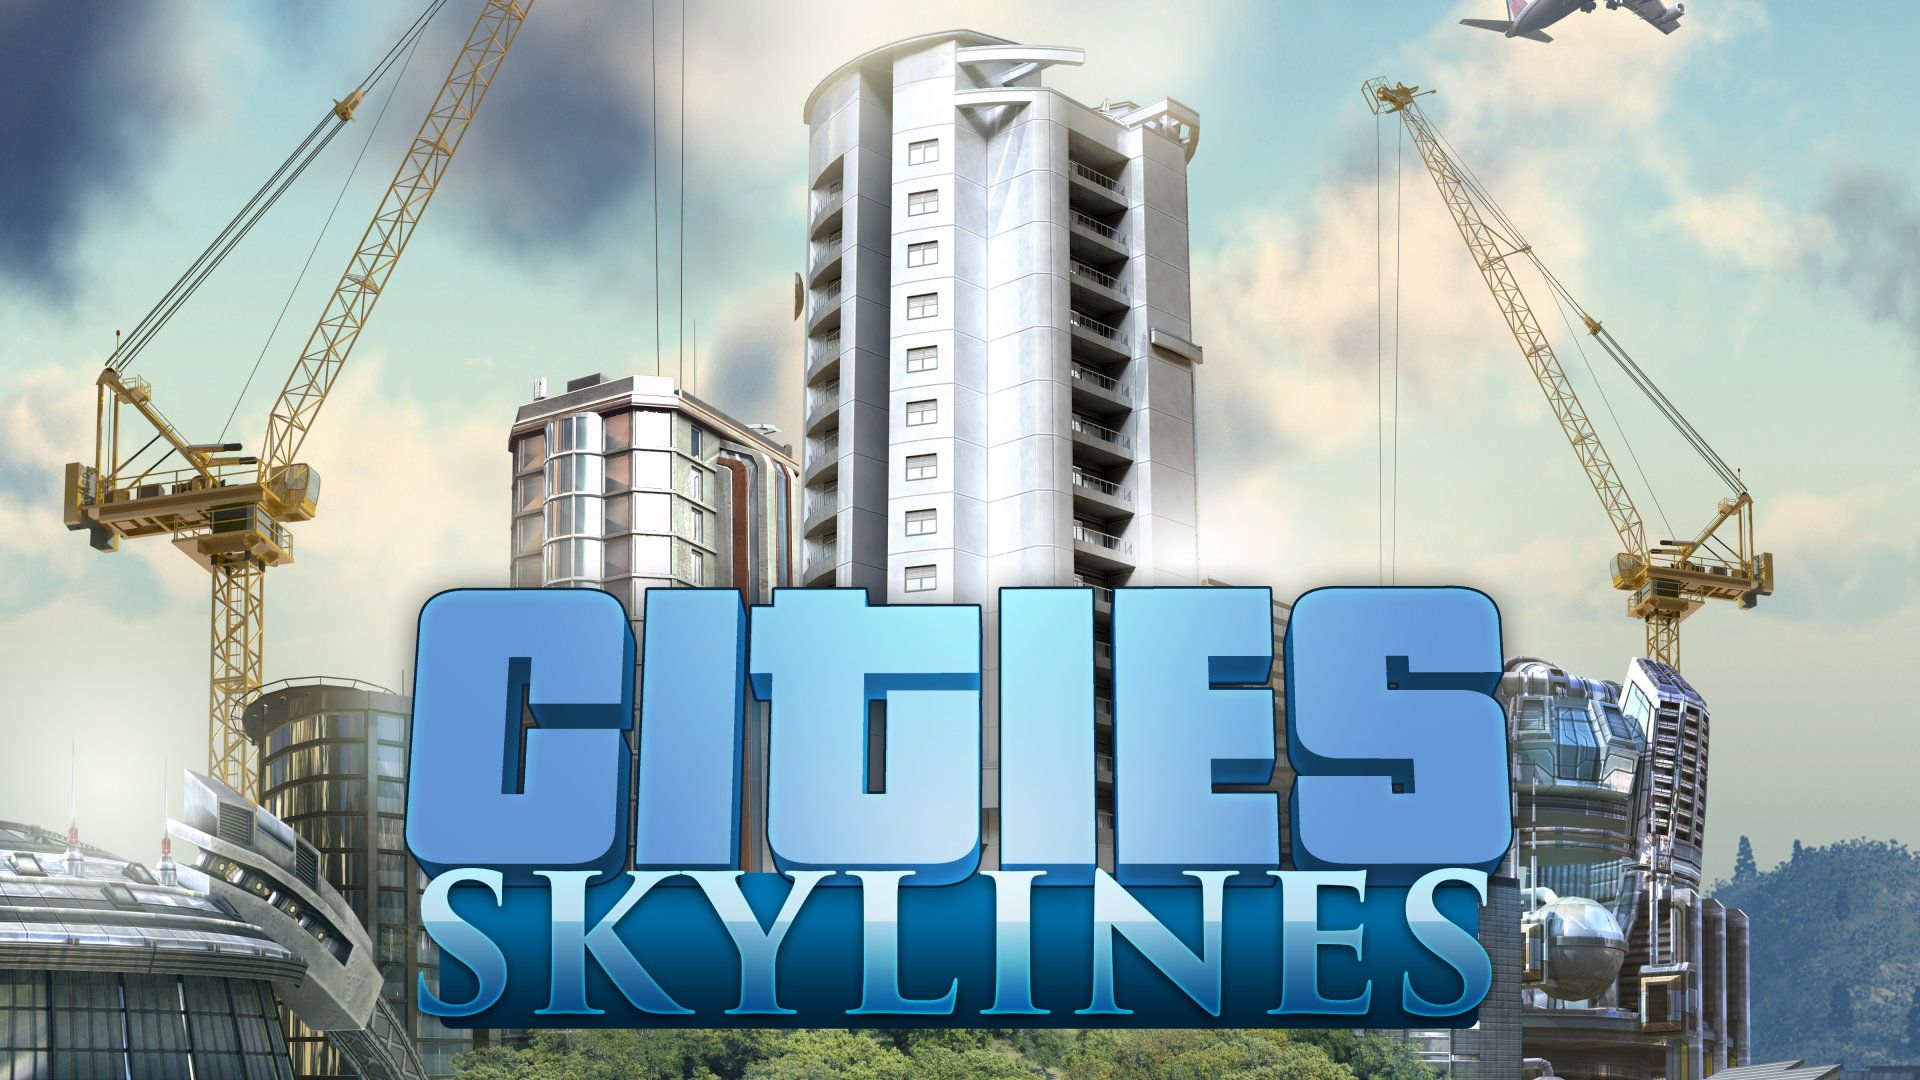 Cities Skylines 2: When Does It Release?